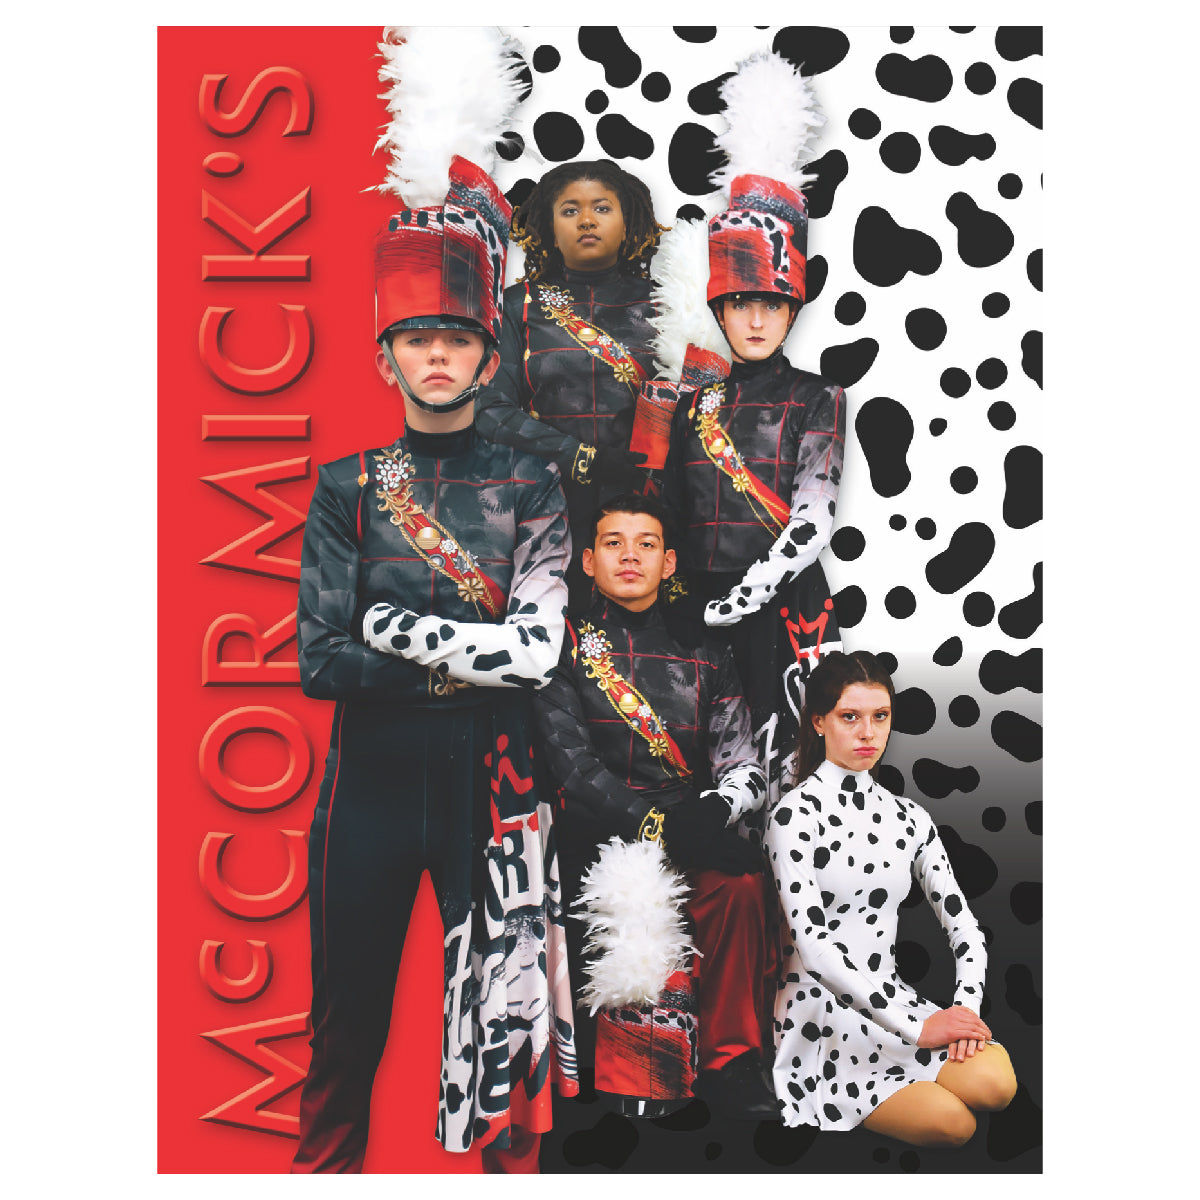 McCormick's - Marching Band and Performance Uniforms, Flags, Equipment